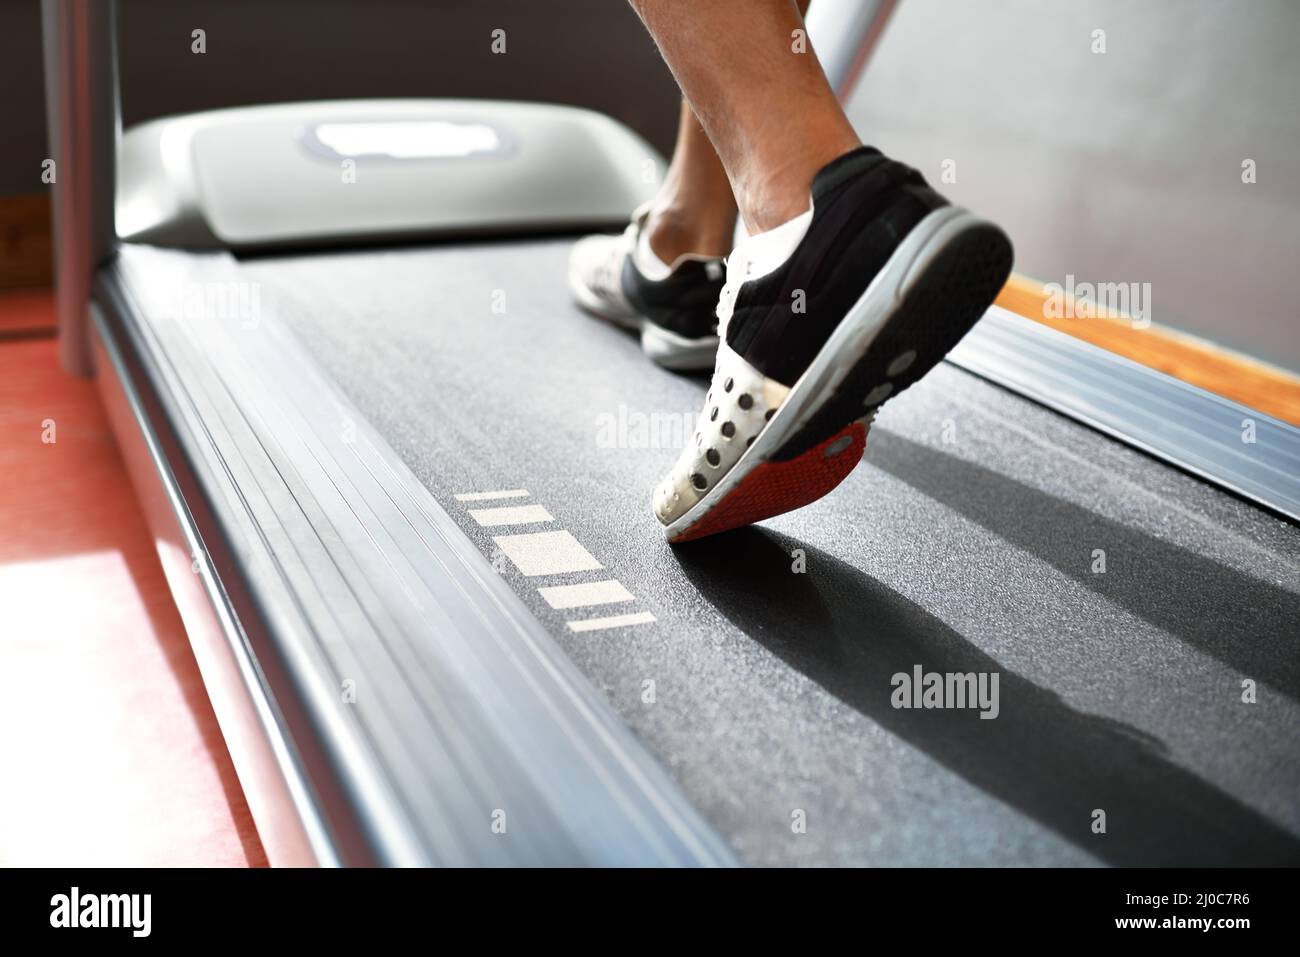 Running to stay fit. Closeup shot of a man on a treadmill at the gym. Stock Photo